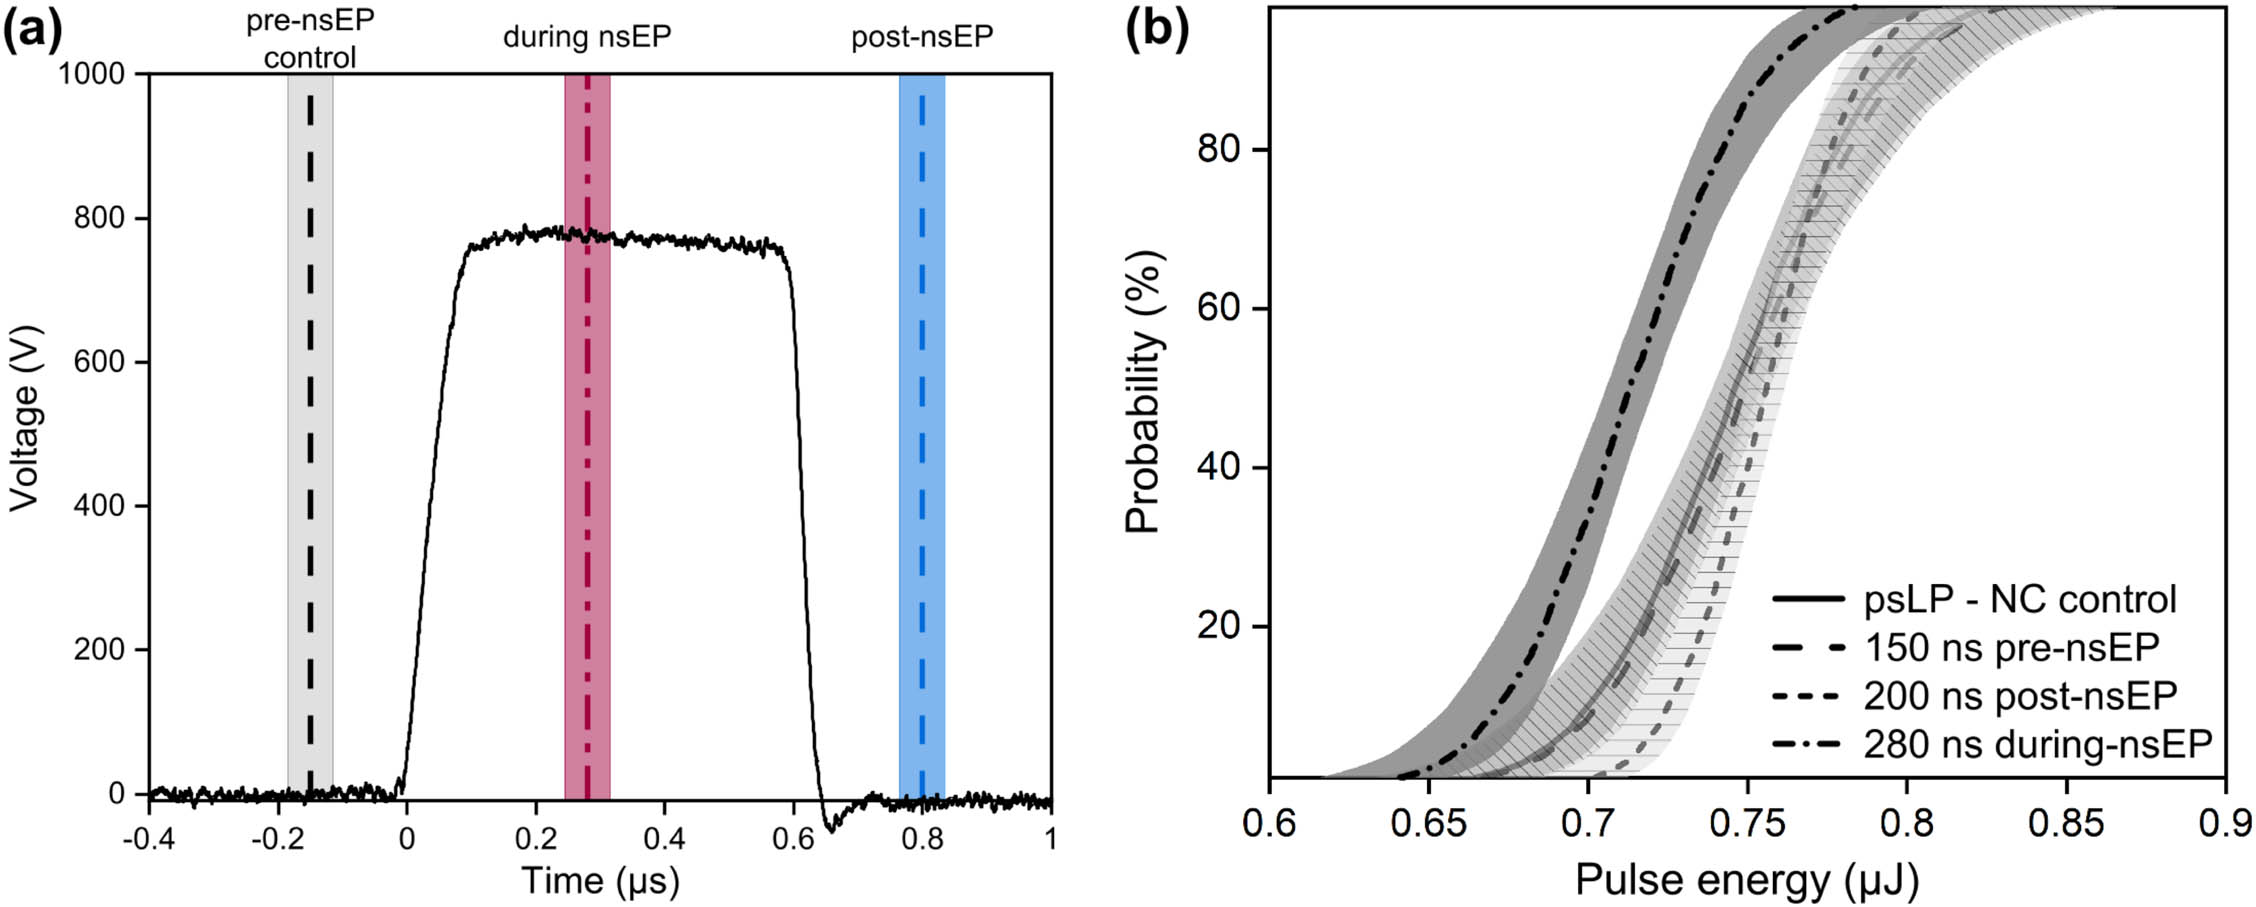 Pulse timing and threshold dependence. (a) nsEP electrical impulse trace (40 kV/cm) and relative timing between of psLP pulses to nsEP. (b) Probit analysis curves from respective time points and control validation.